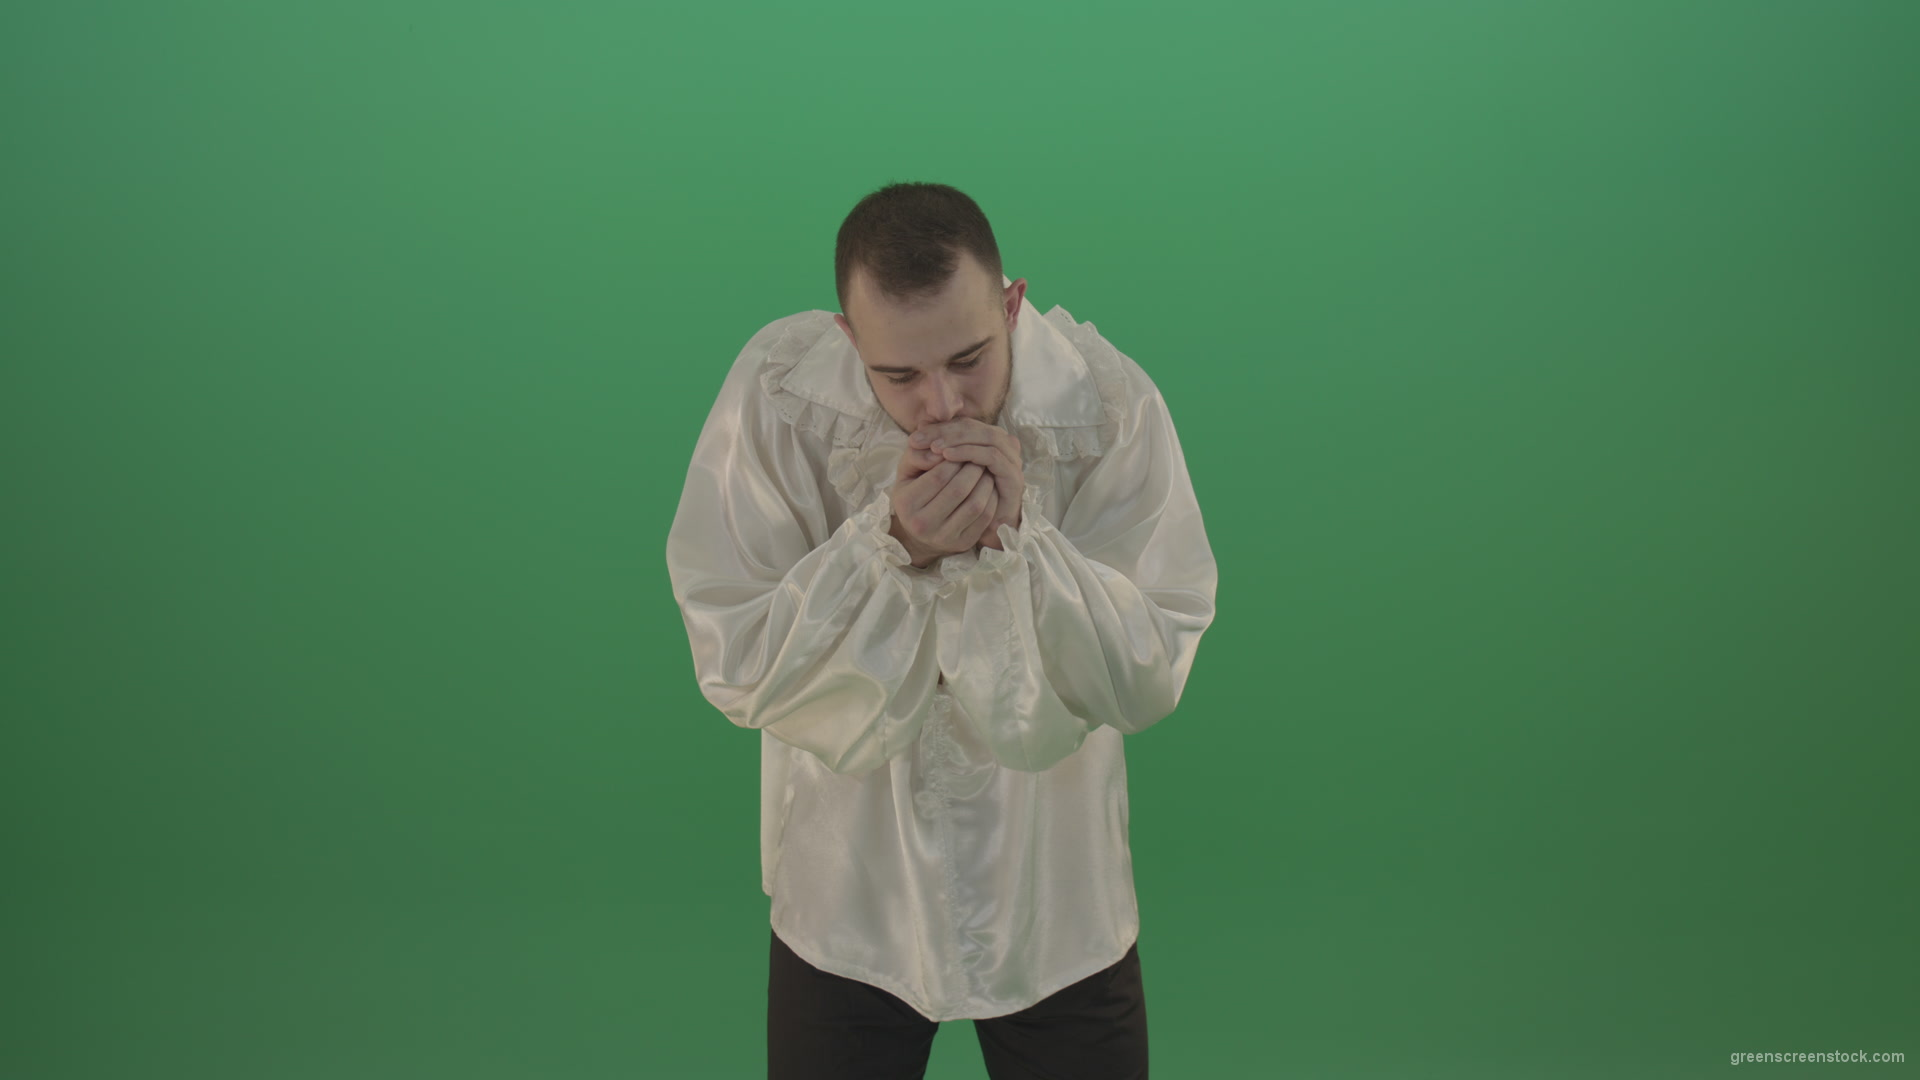 Boy-gives-flower-squeezing-in-the-sleeves-elegantly-in-hand-isolated-on-green-screen_005 Green Screen Stock